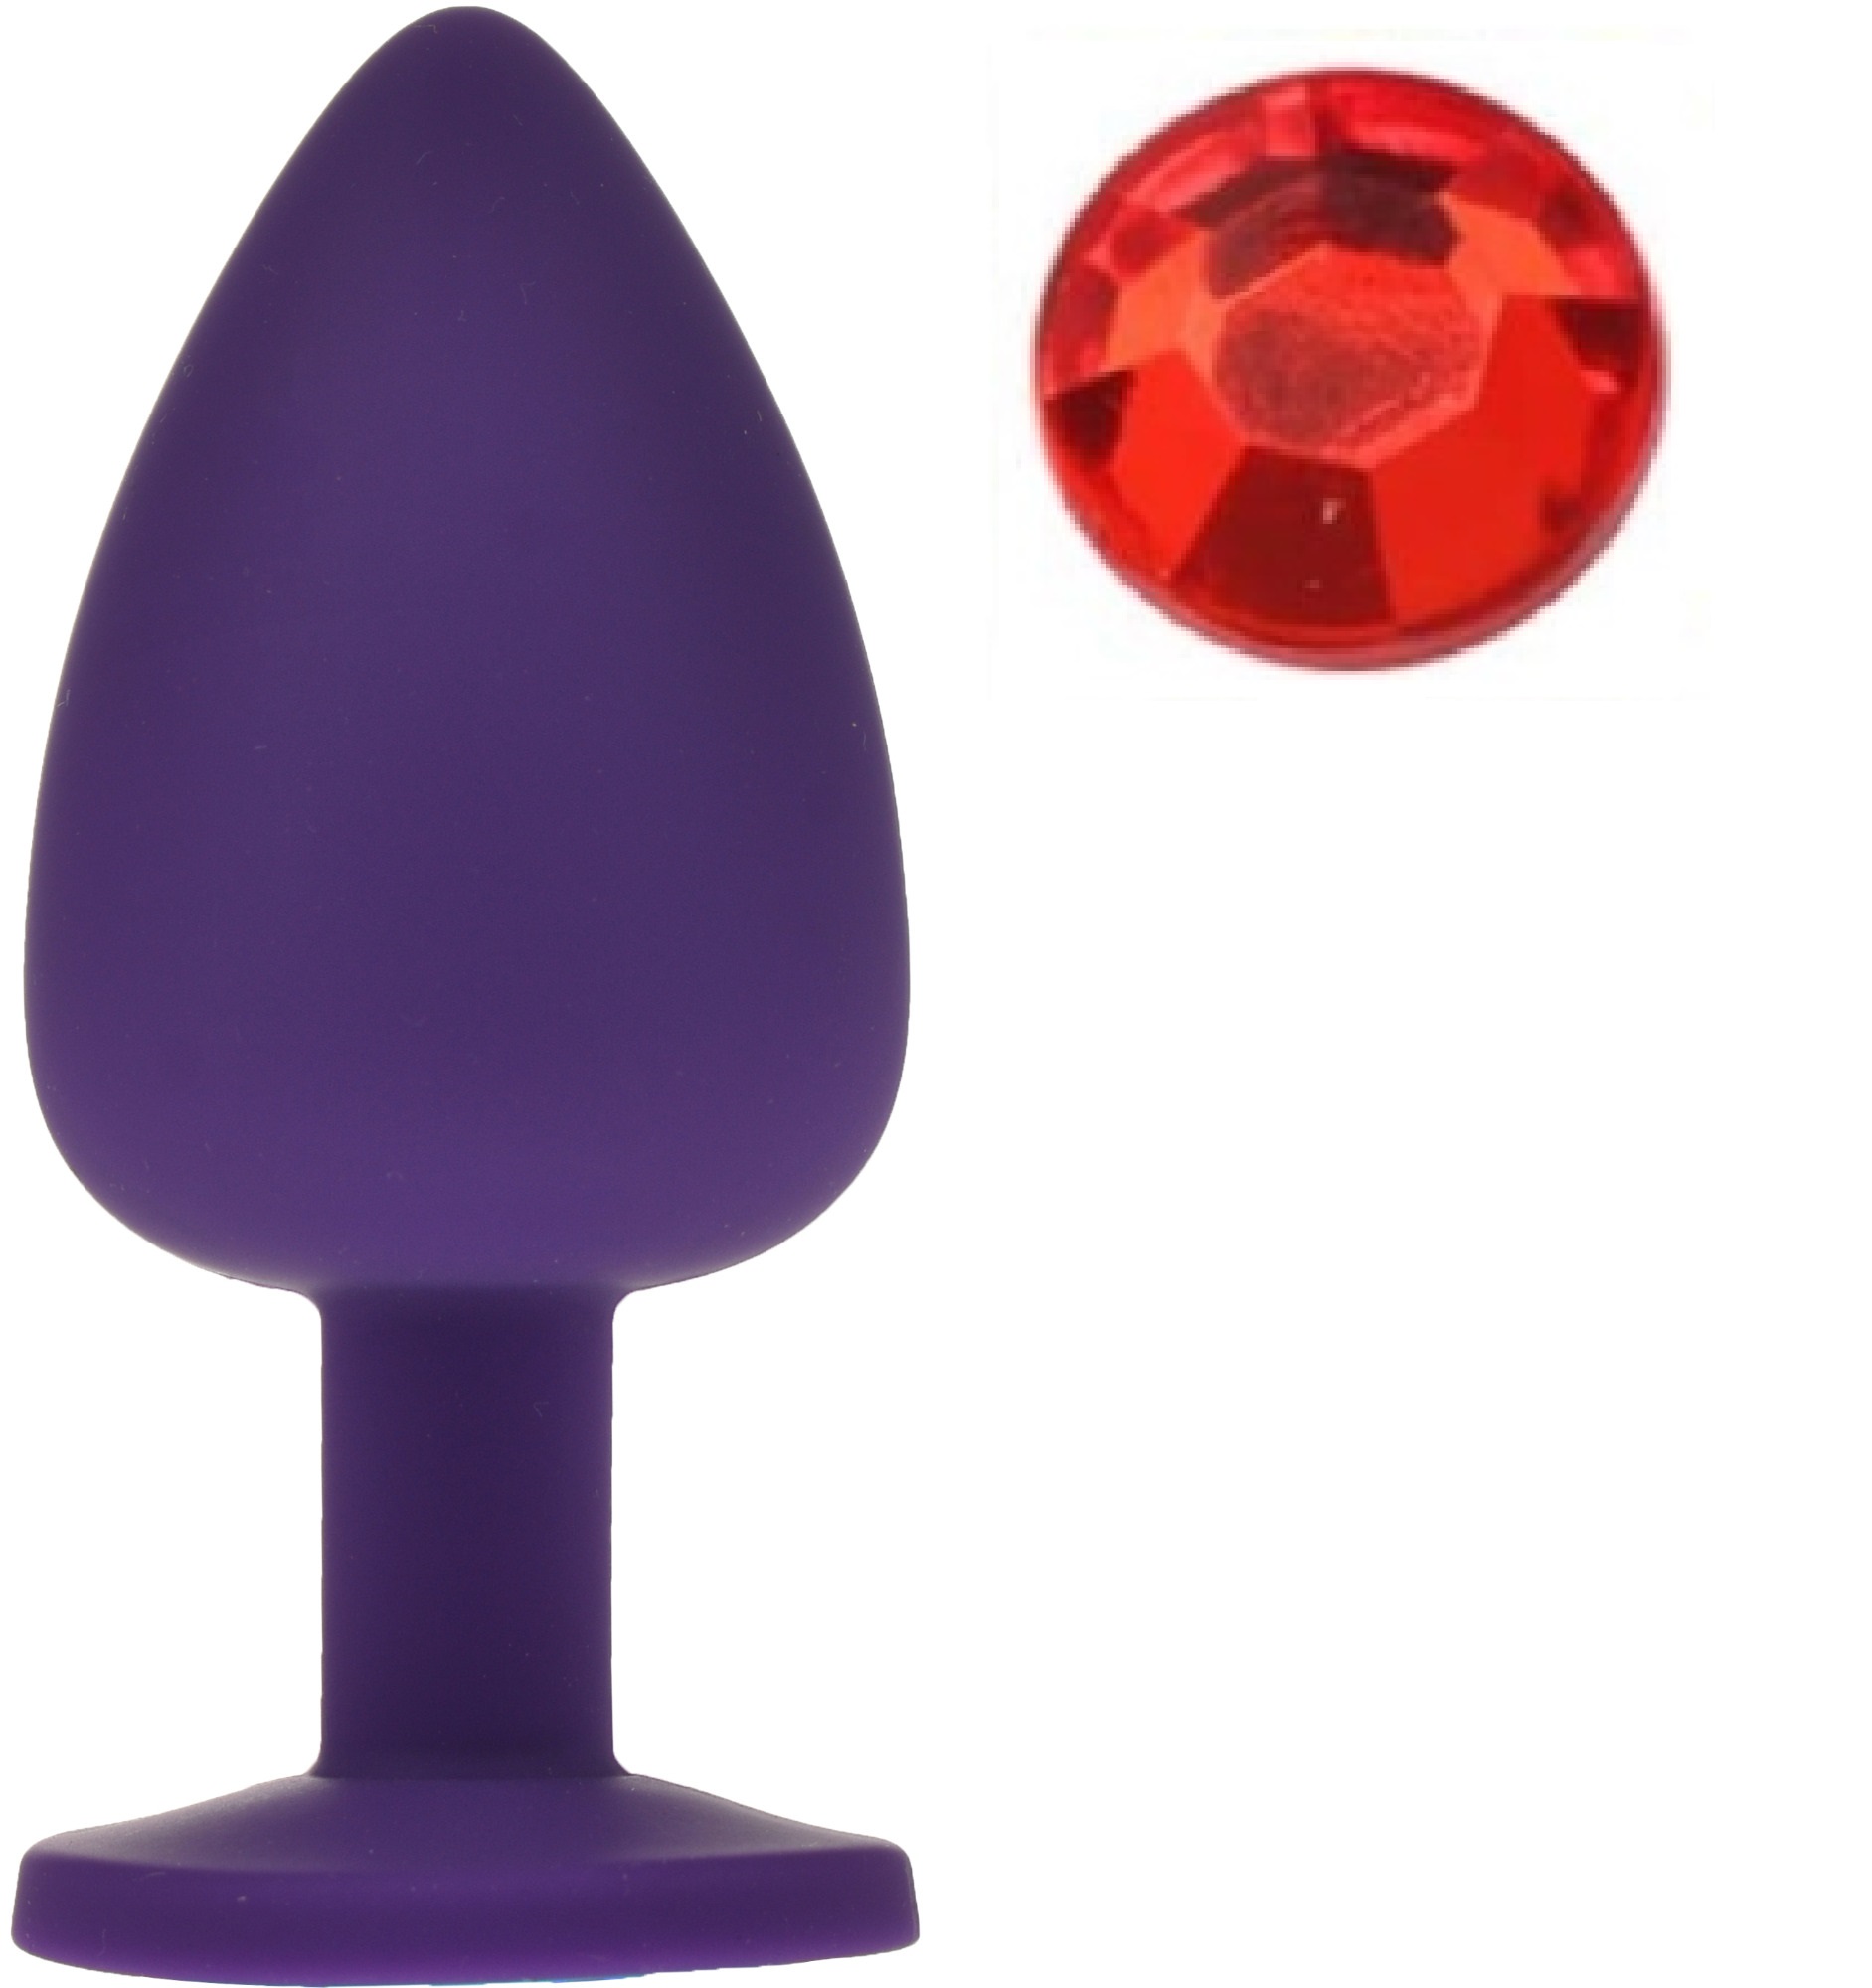 Dop Anal Silicone Buttplug Large Mov/Ros in SexShop KUR Romania